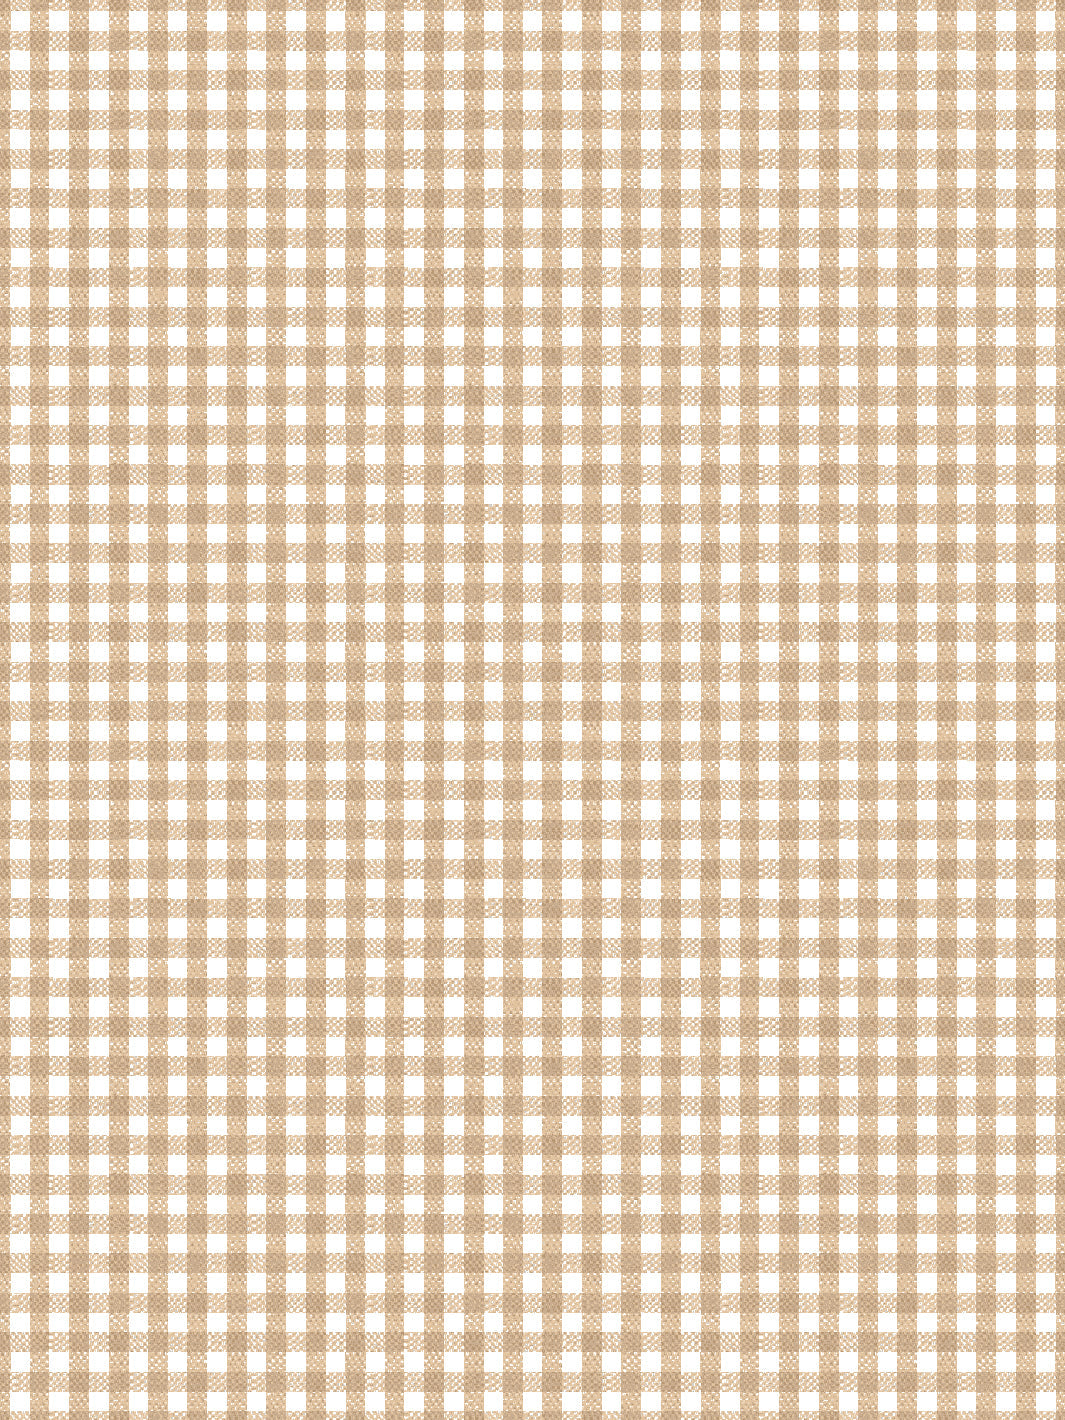 'Pixie Gingham' Wallpaper by Sarah Jessica Parker - Sable